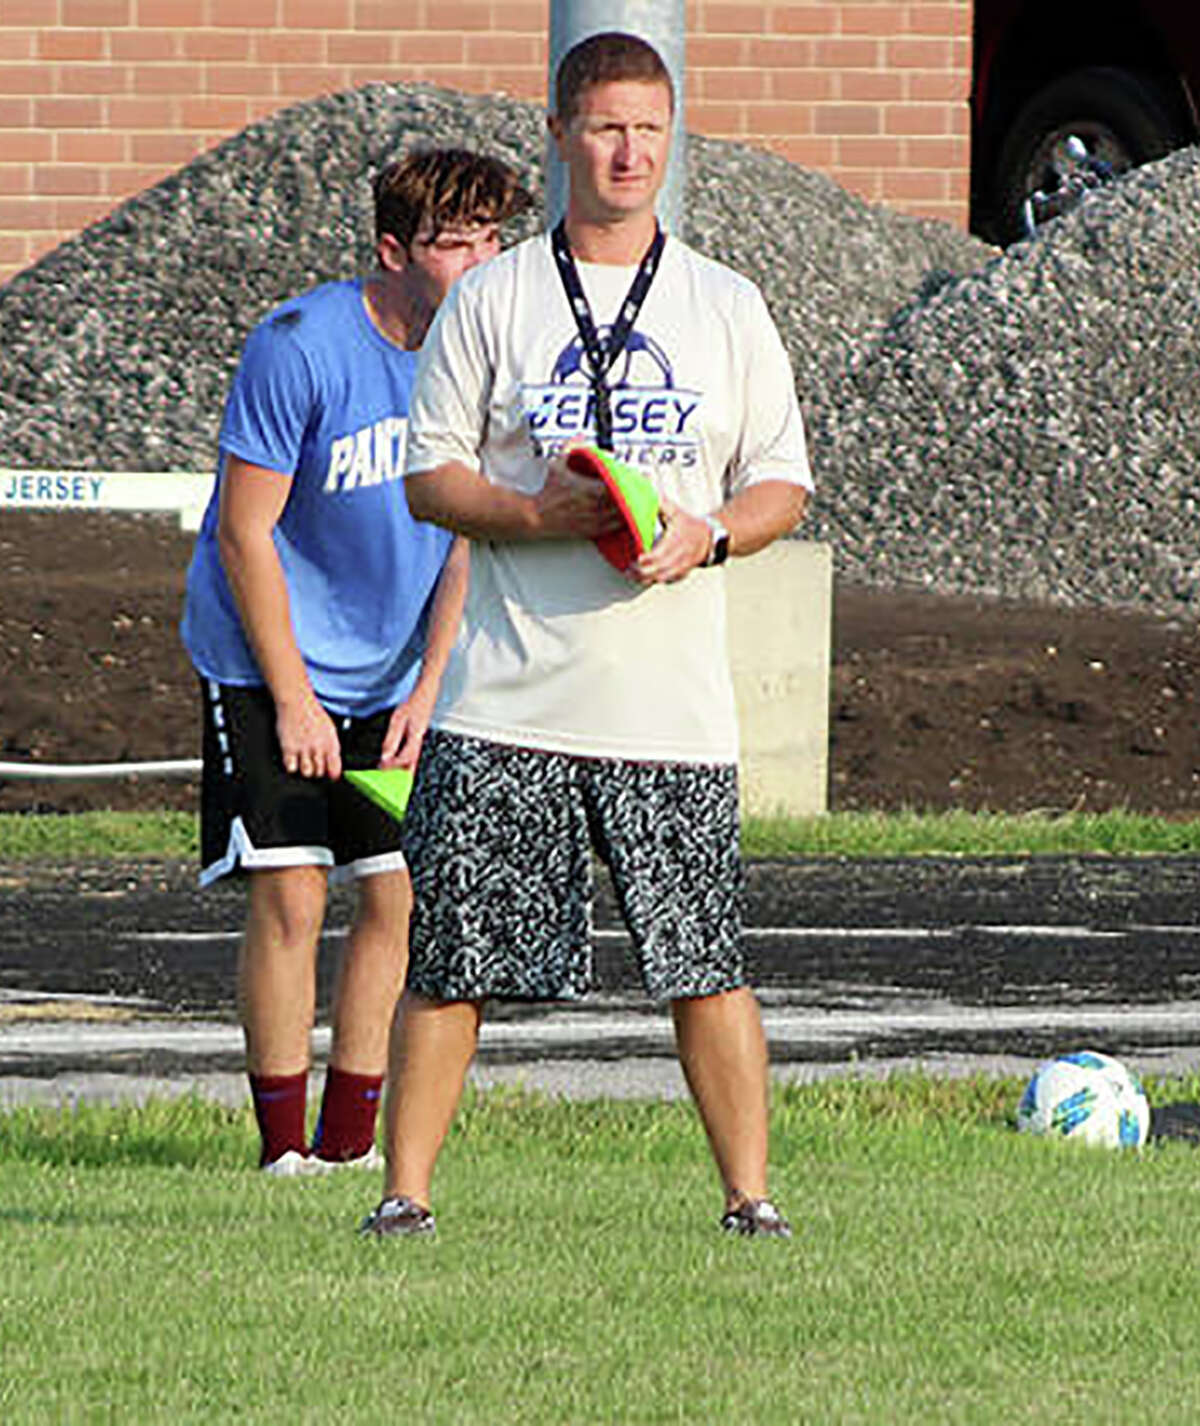 Jersey soccer coach Scott Burney's Panthers opened their season with a 4-2 win at Breese Mater Dei Wednesday. They will play net in the Alton Redbirds Tournament beginning Thursday against Beardstown at 4:30 p.m.